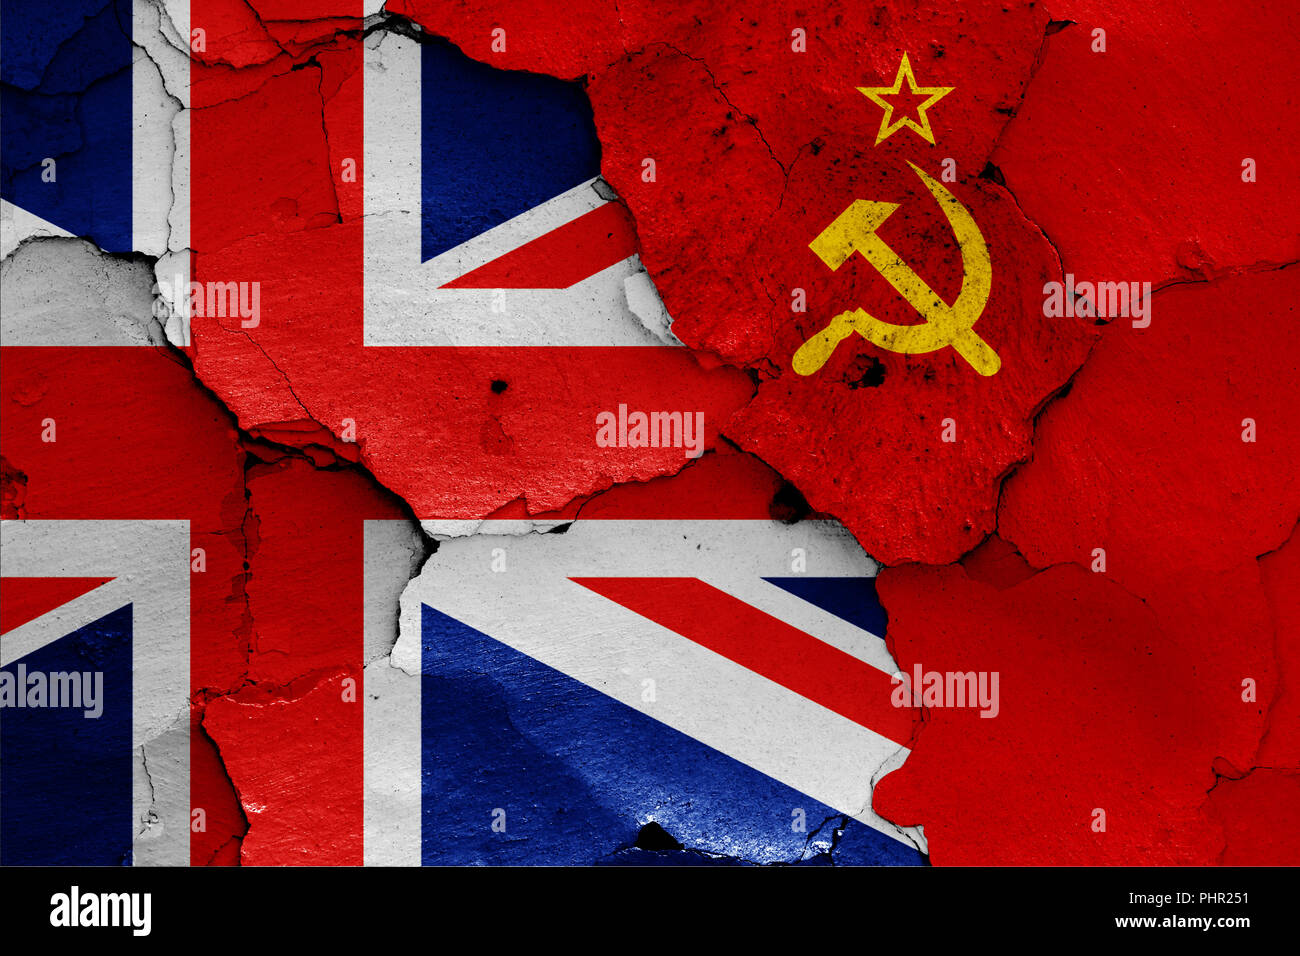 flags of UK and Soviet Union Stock Photo